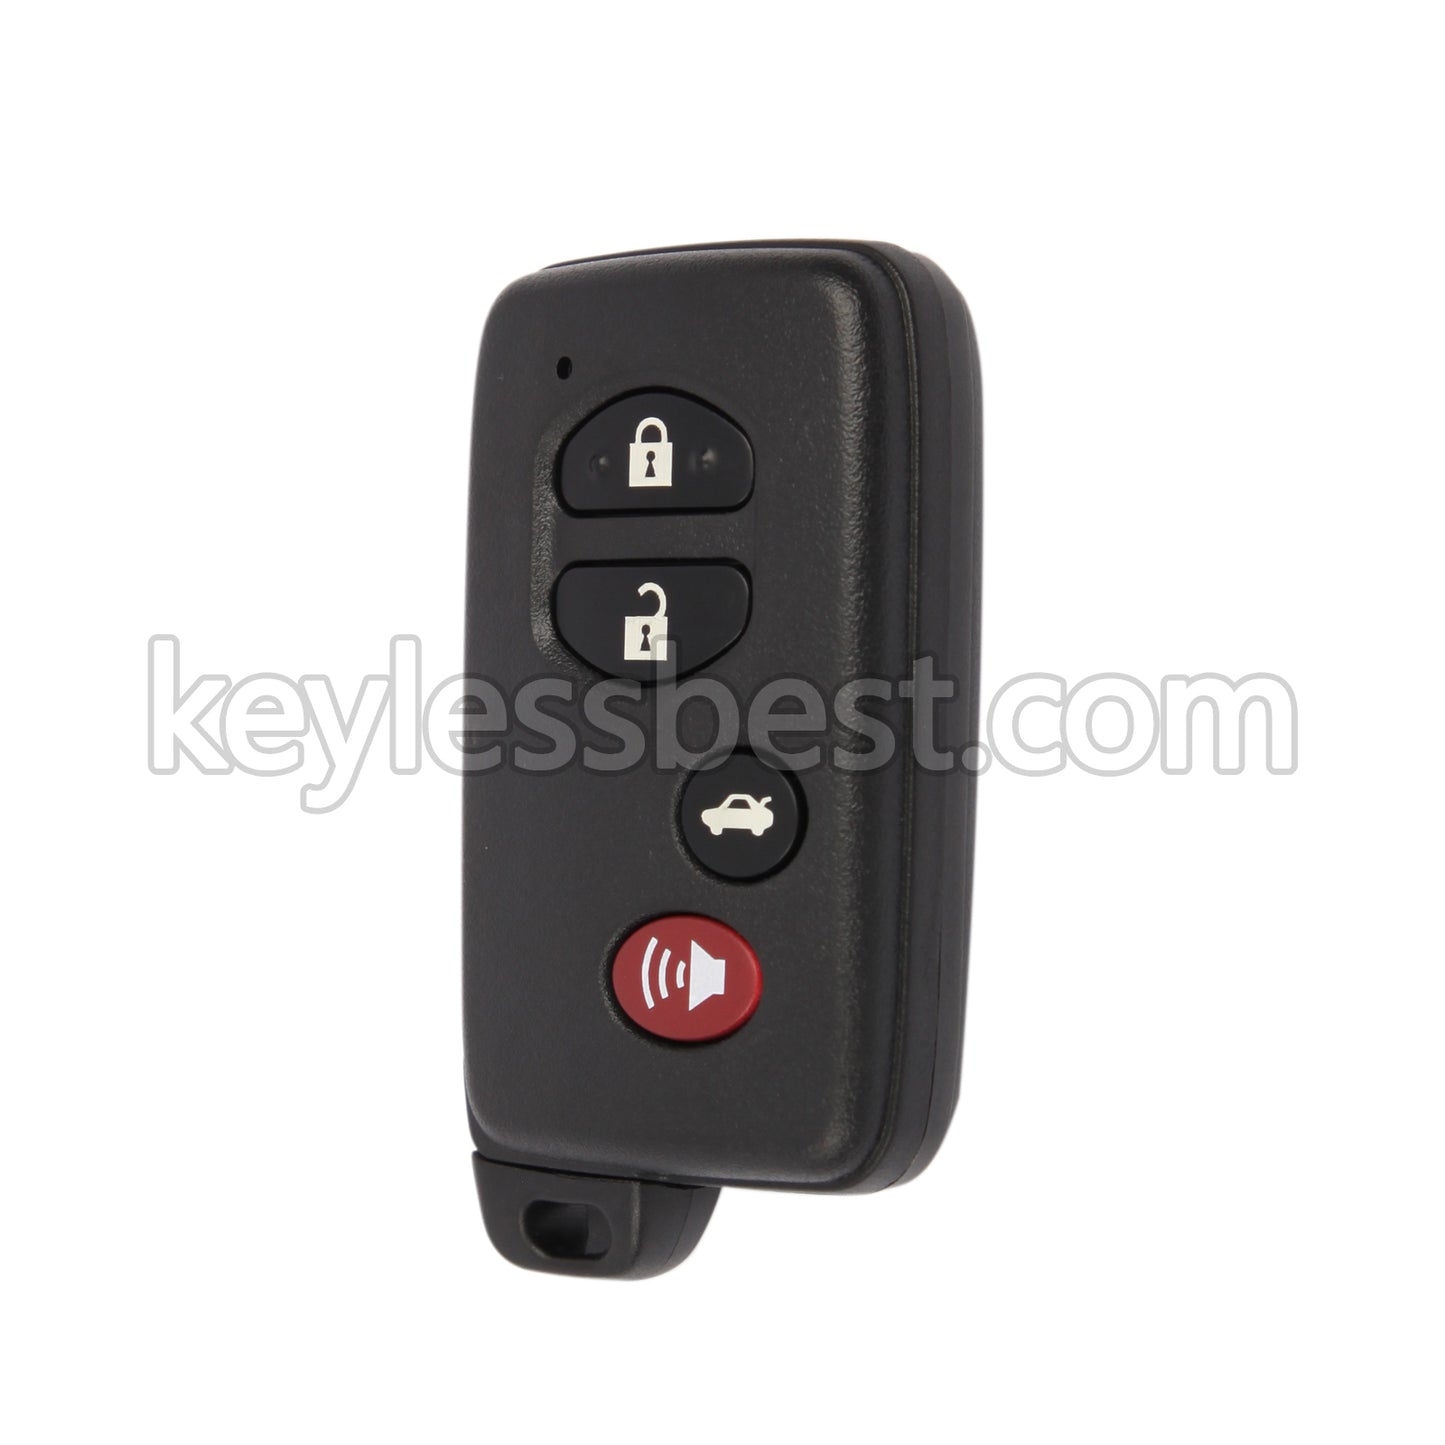 2009 - 2014 Toyota Avalon Camry Corolla / 4 Buttons Remote Key / HYQ14AEM / 315MHz